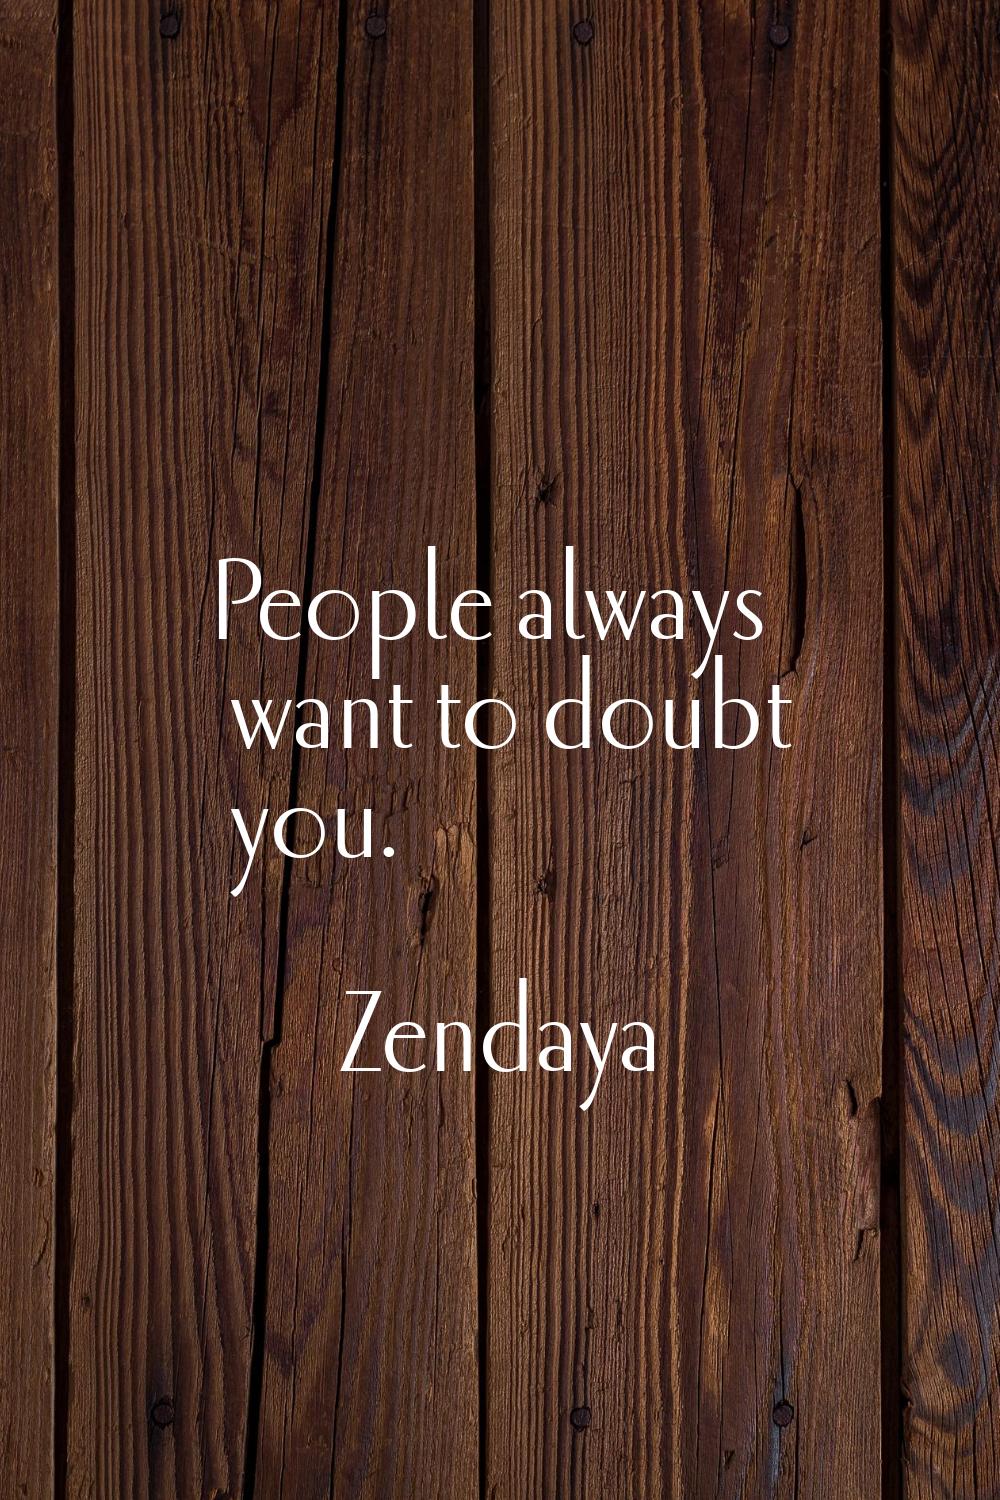 People always want to doubt you.